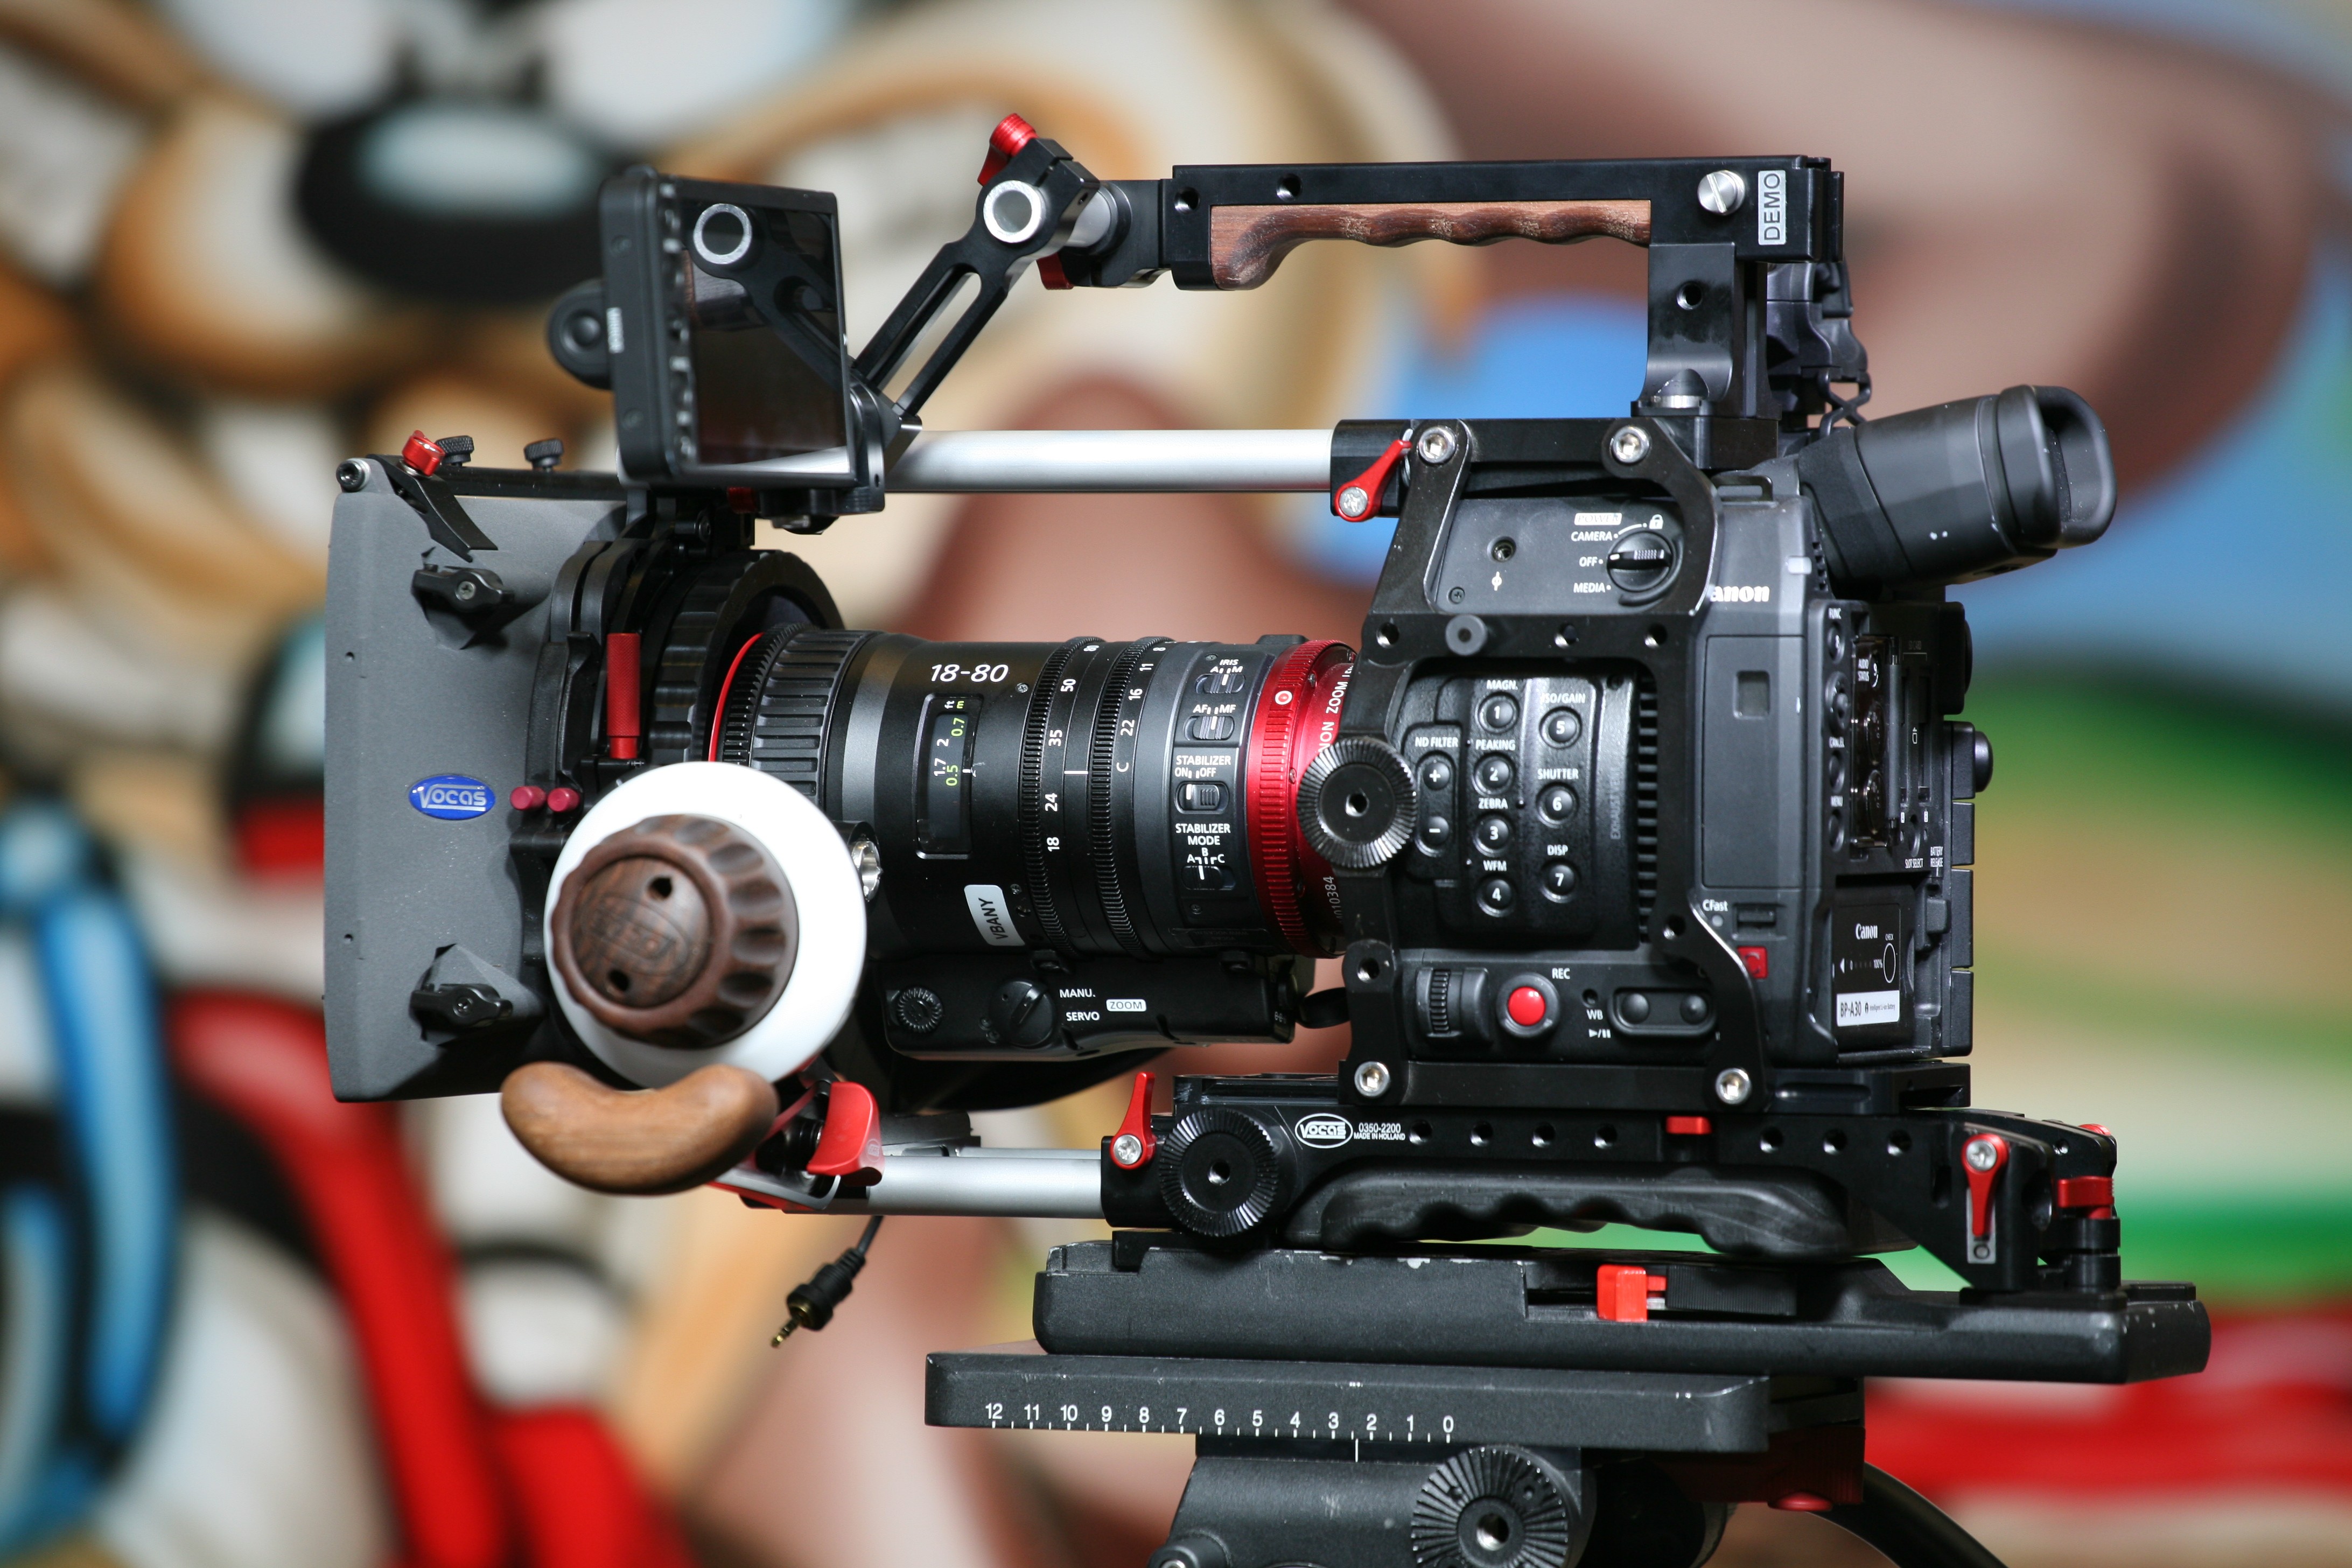 Introducing the new Vocas accessories for the Canon EOS C200 